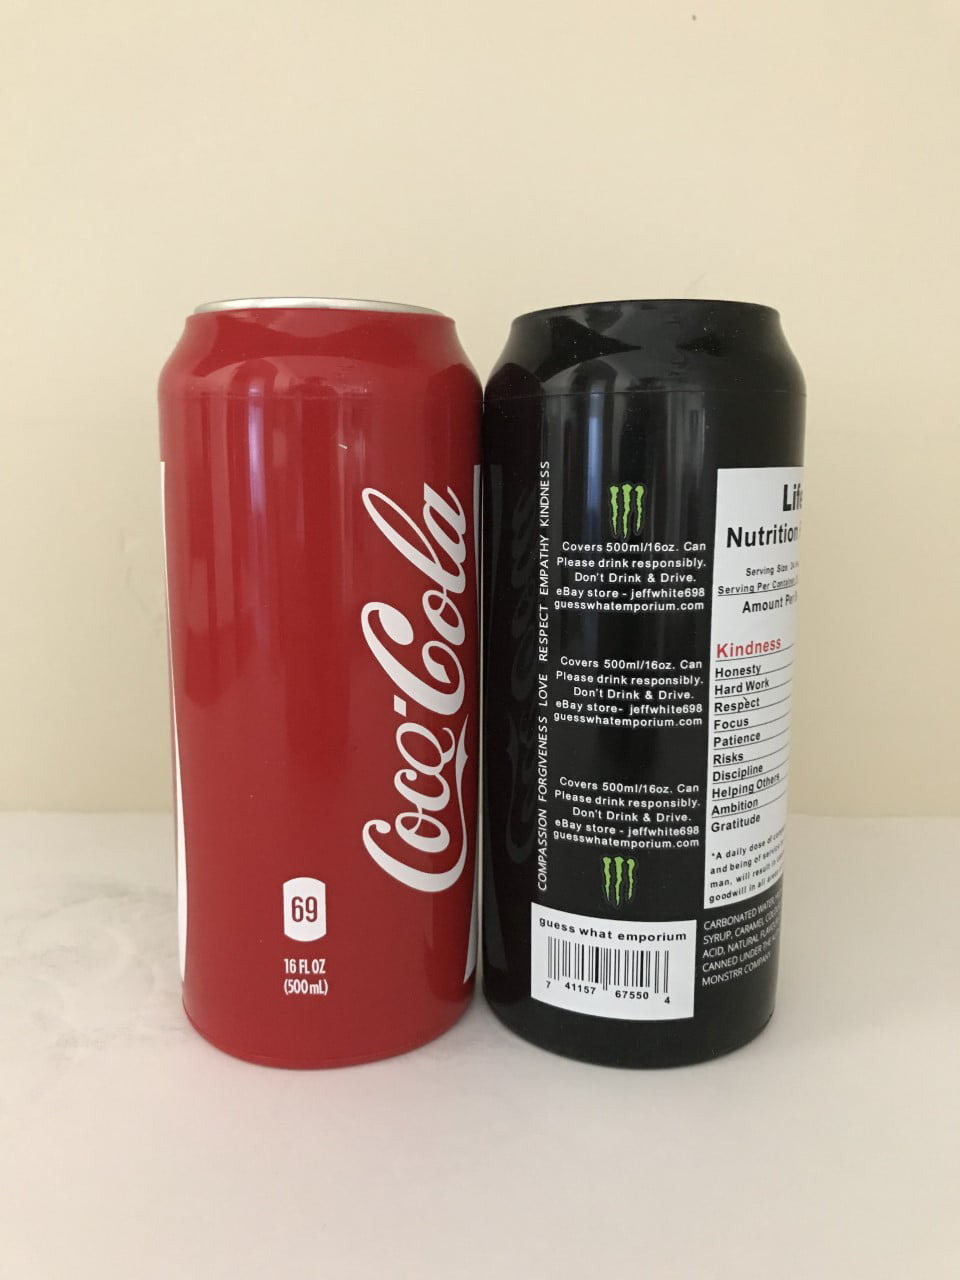 Can Covers for Soda, Beer, Energy Drink Cans/ Standard, Slim, Tall